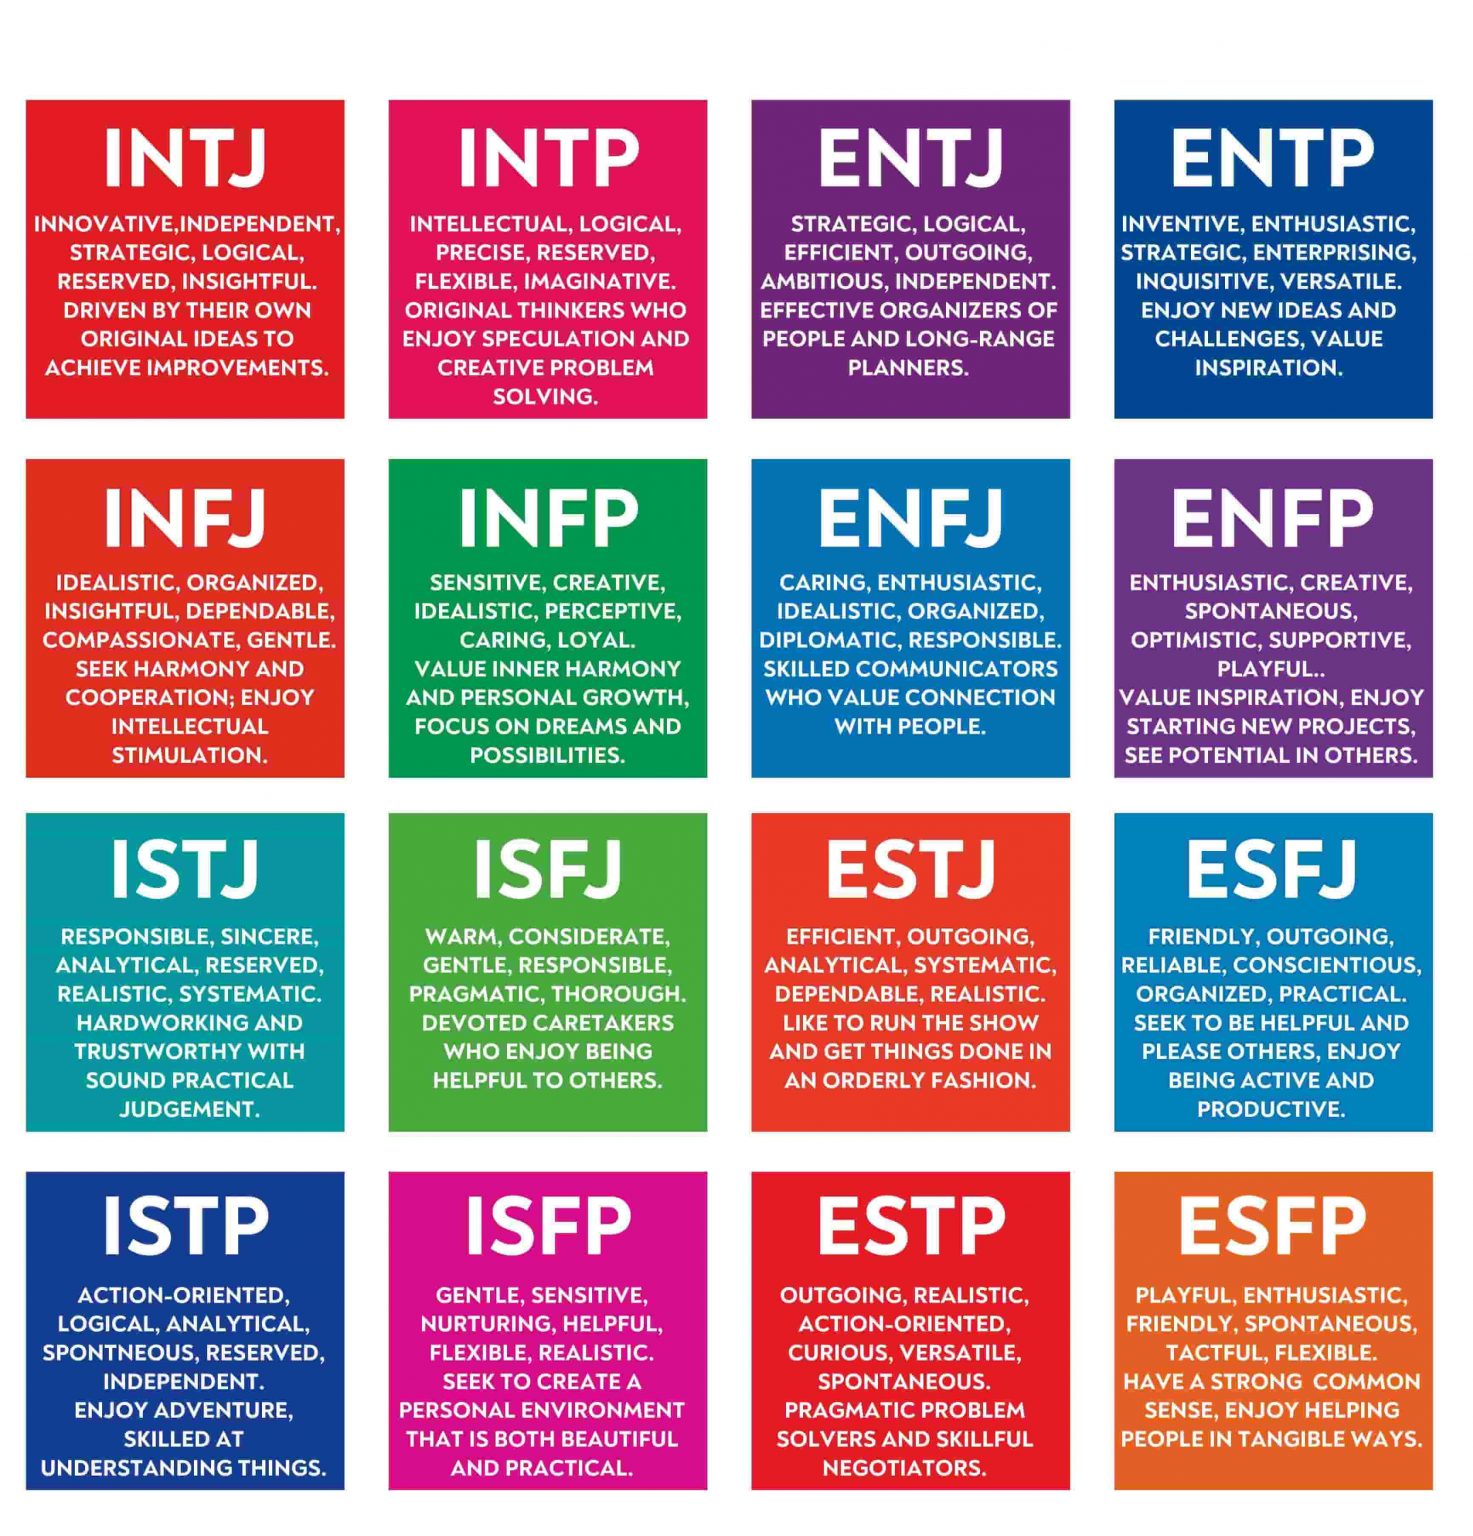 Myers Briggs Personality Test Let’s Explore Your Personality Type!